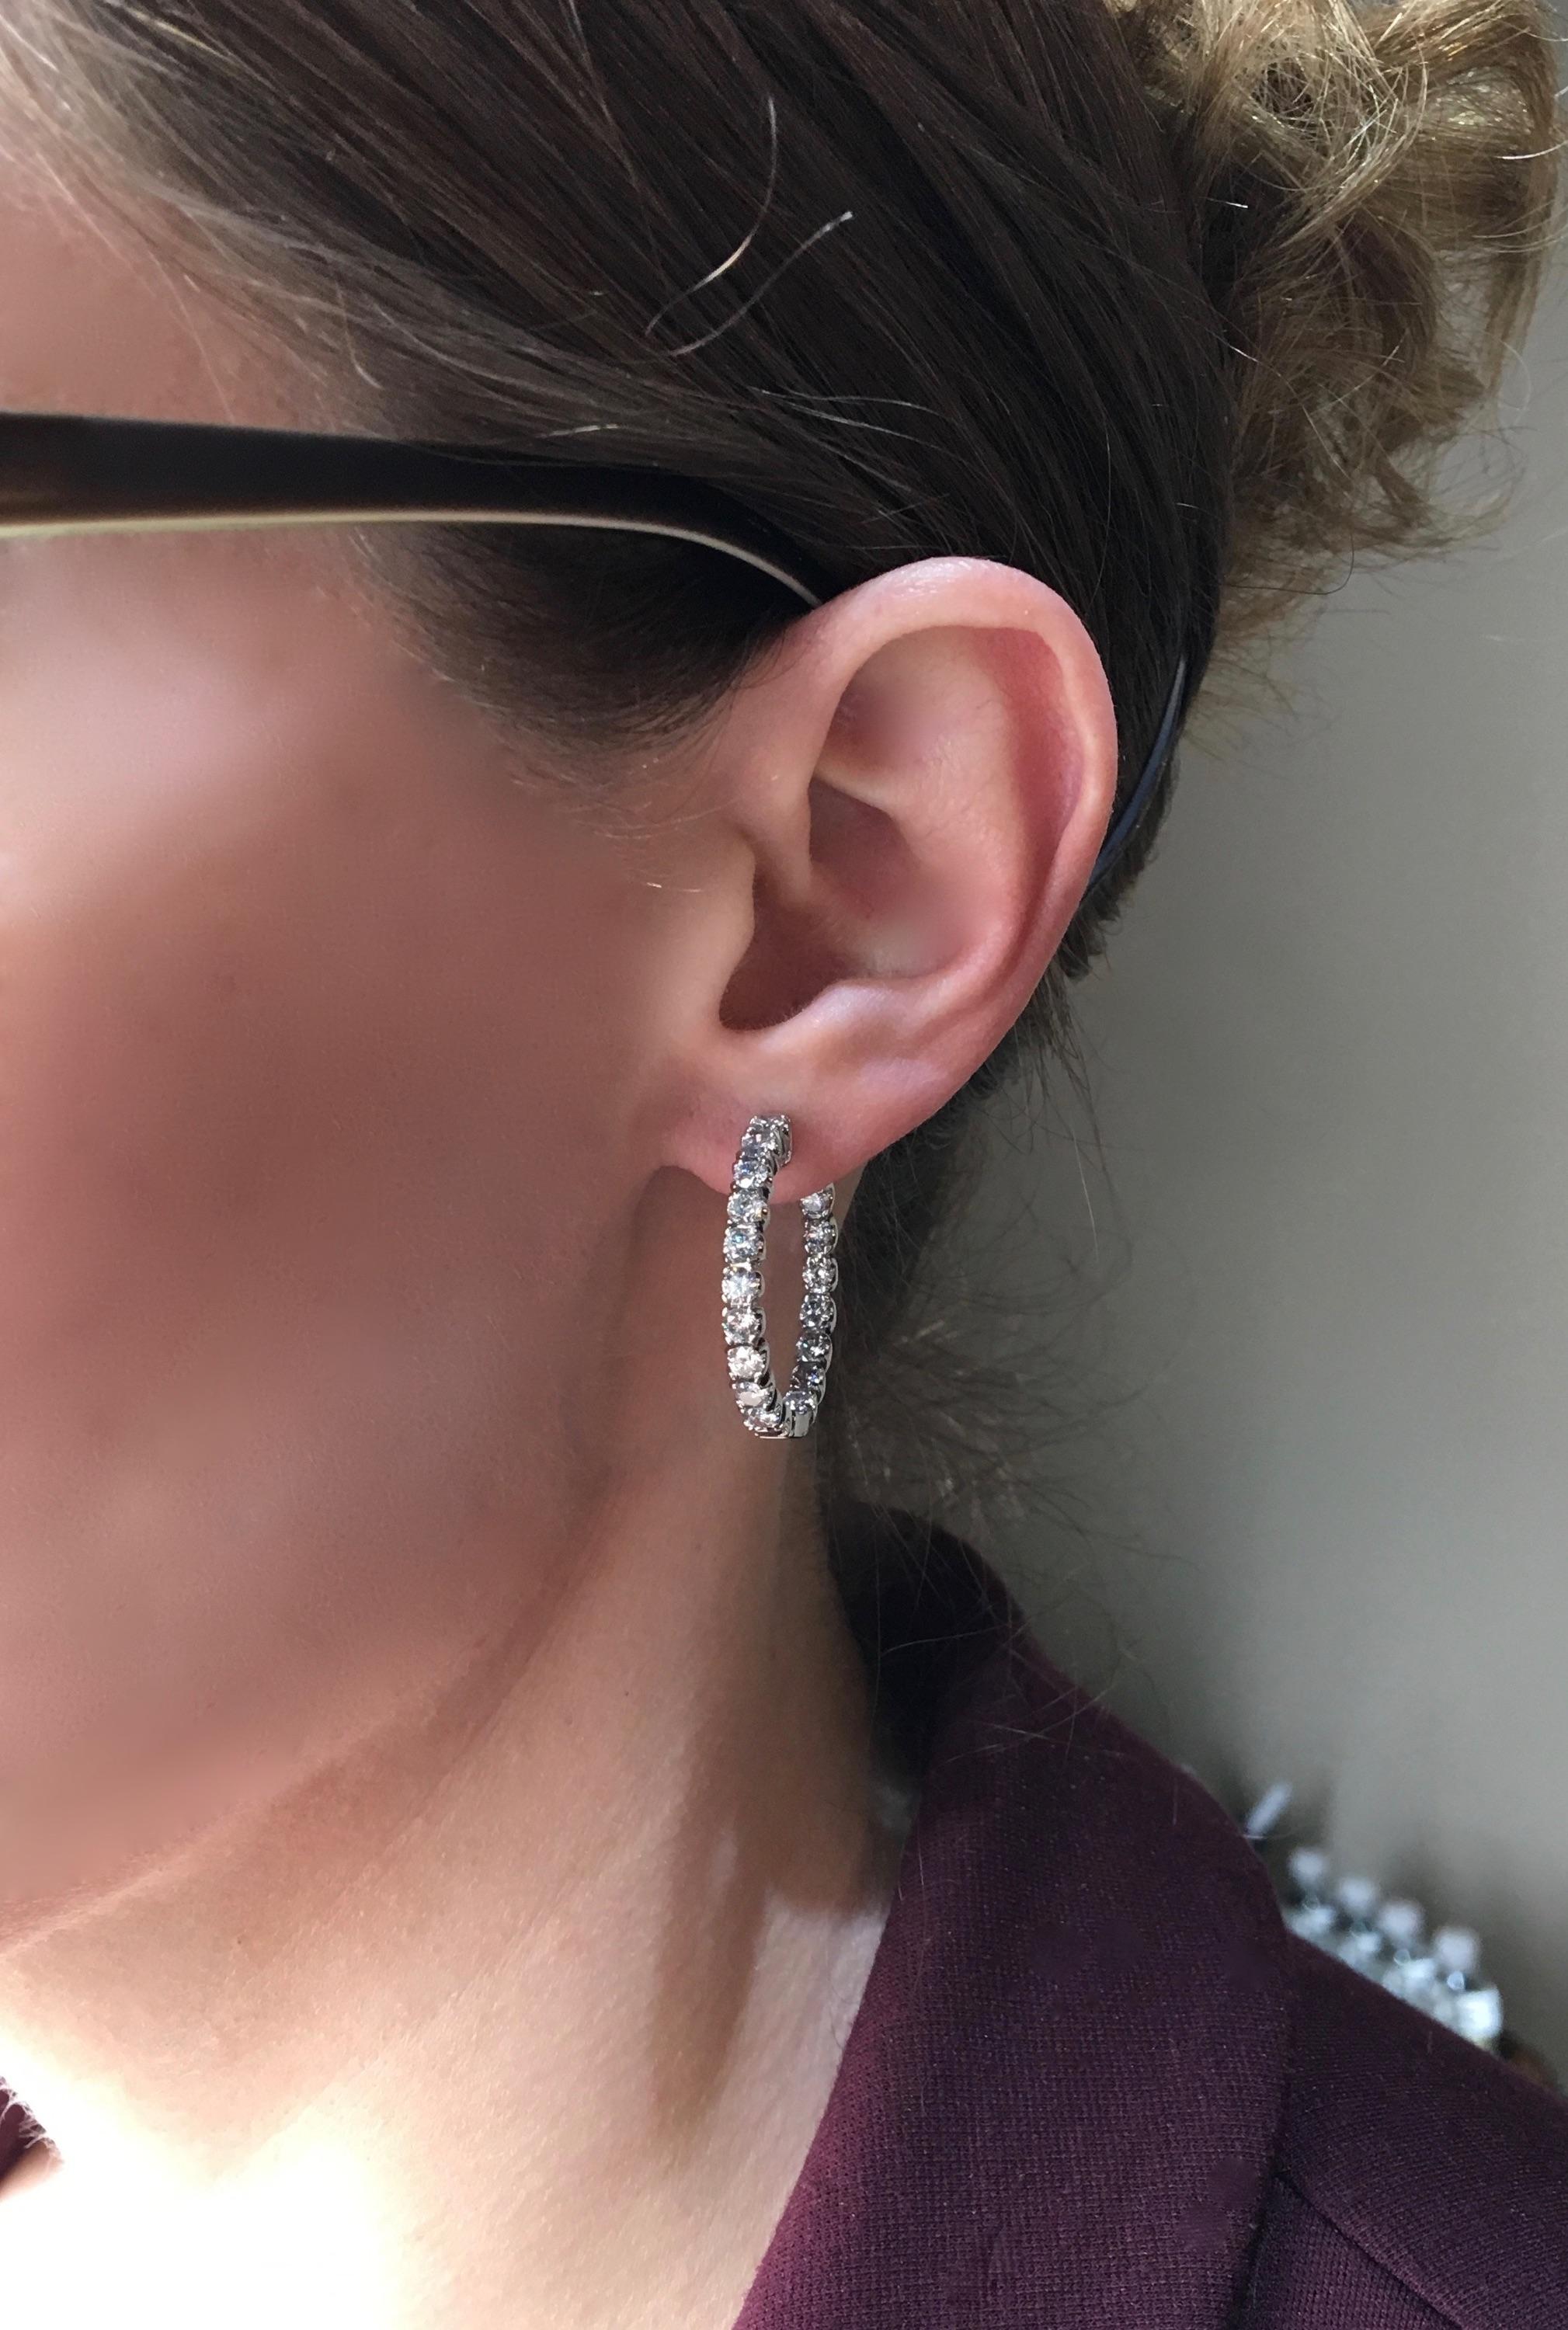 Approximately 2.75CTW inside out diamond hoop earrings crafted in 14K white gold.

Diamond Carat Weight: Approximately 2.75CTW 
Diamond Cut: Round Brilliant Diamonds
Color: Average G-J
Clarity: Average I
Metal: 14K White Gold
Marked/Tested: Stamped